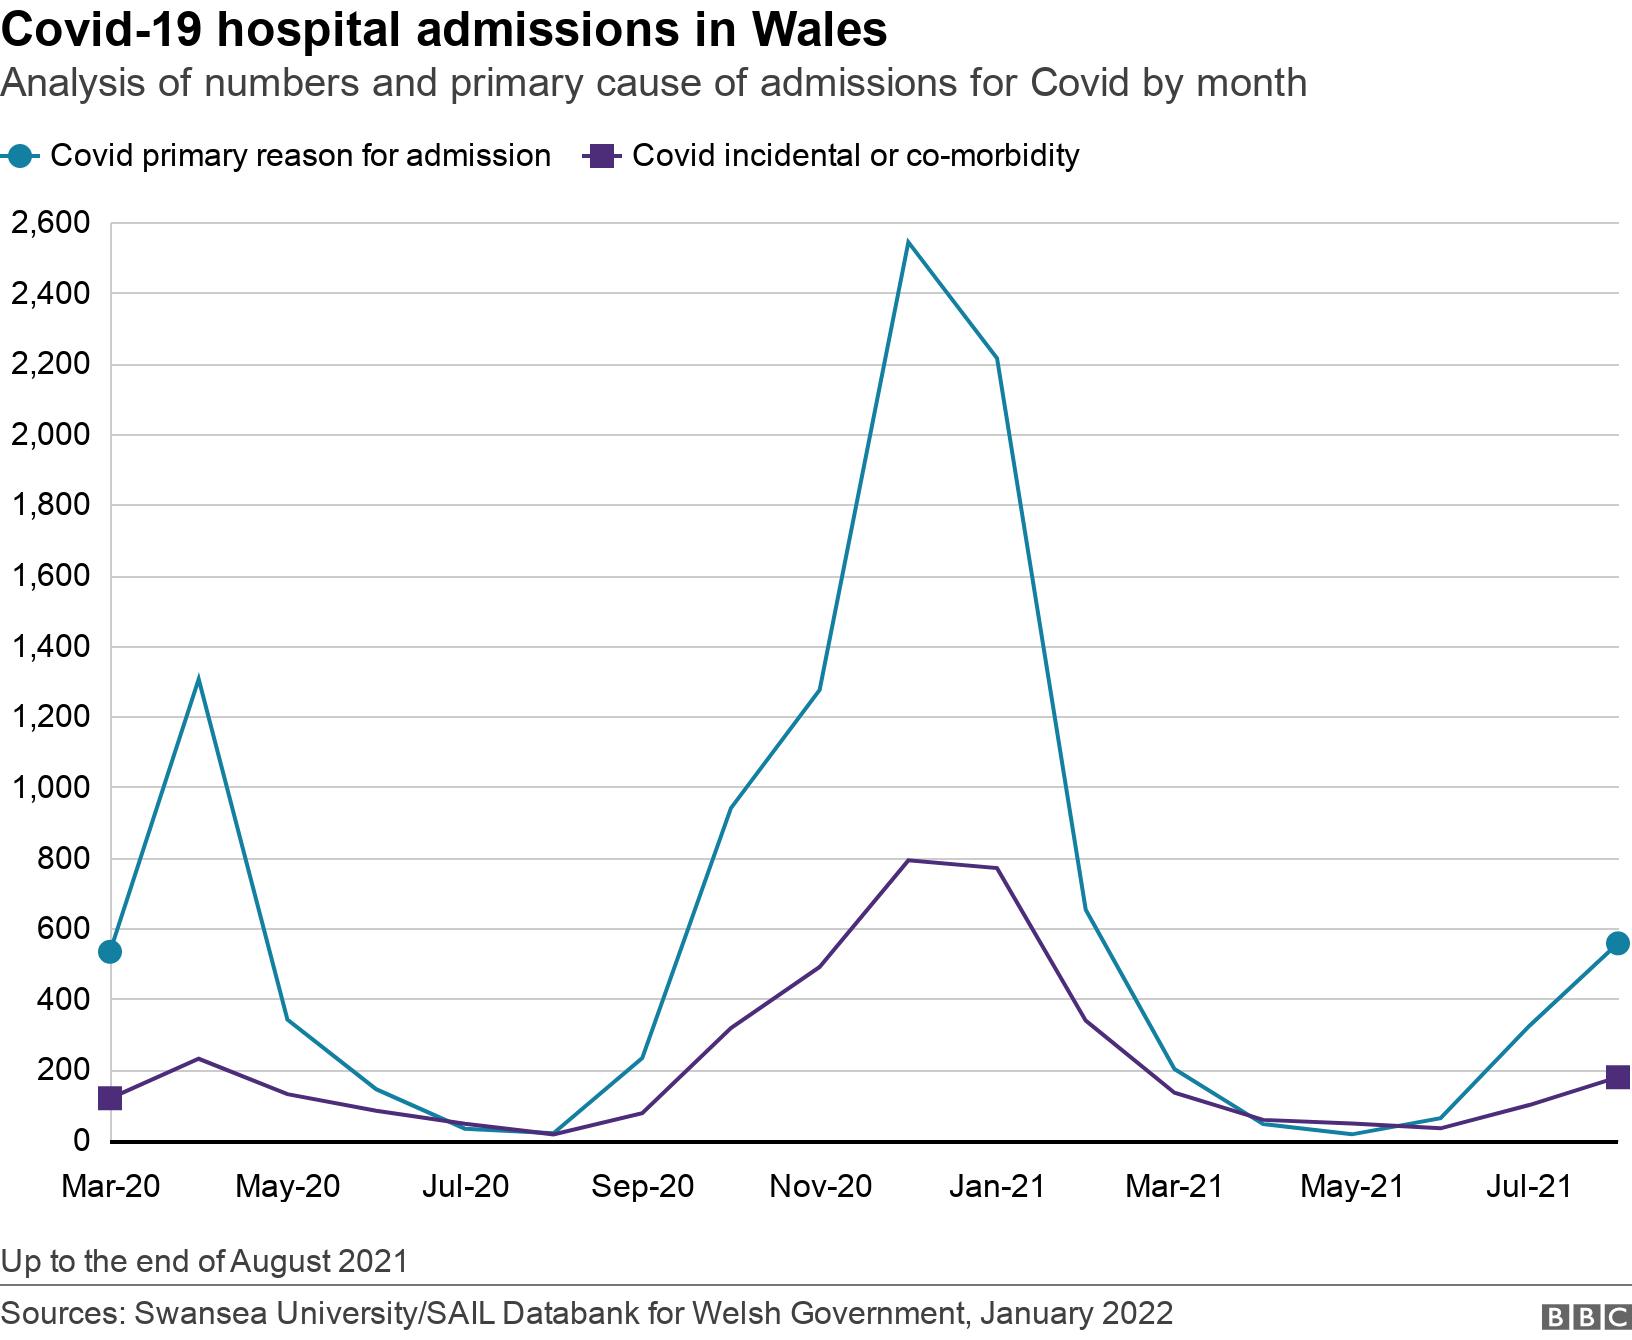 Covid-19 hospital admissions in Wales. Analysis of numbers and primary cause of admissions for Covid by month.  Up to the end of August 2021.